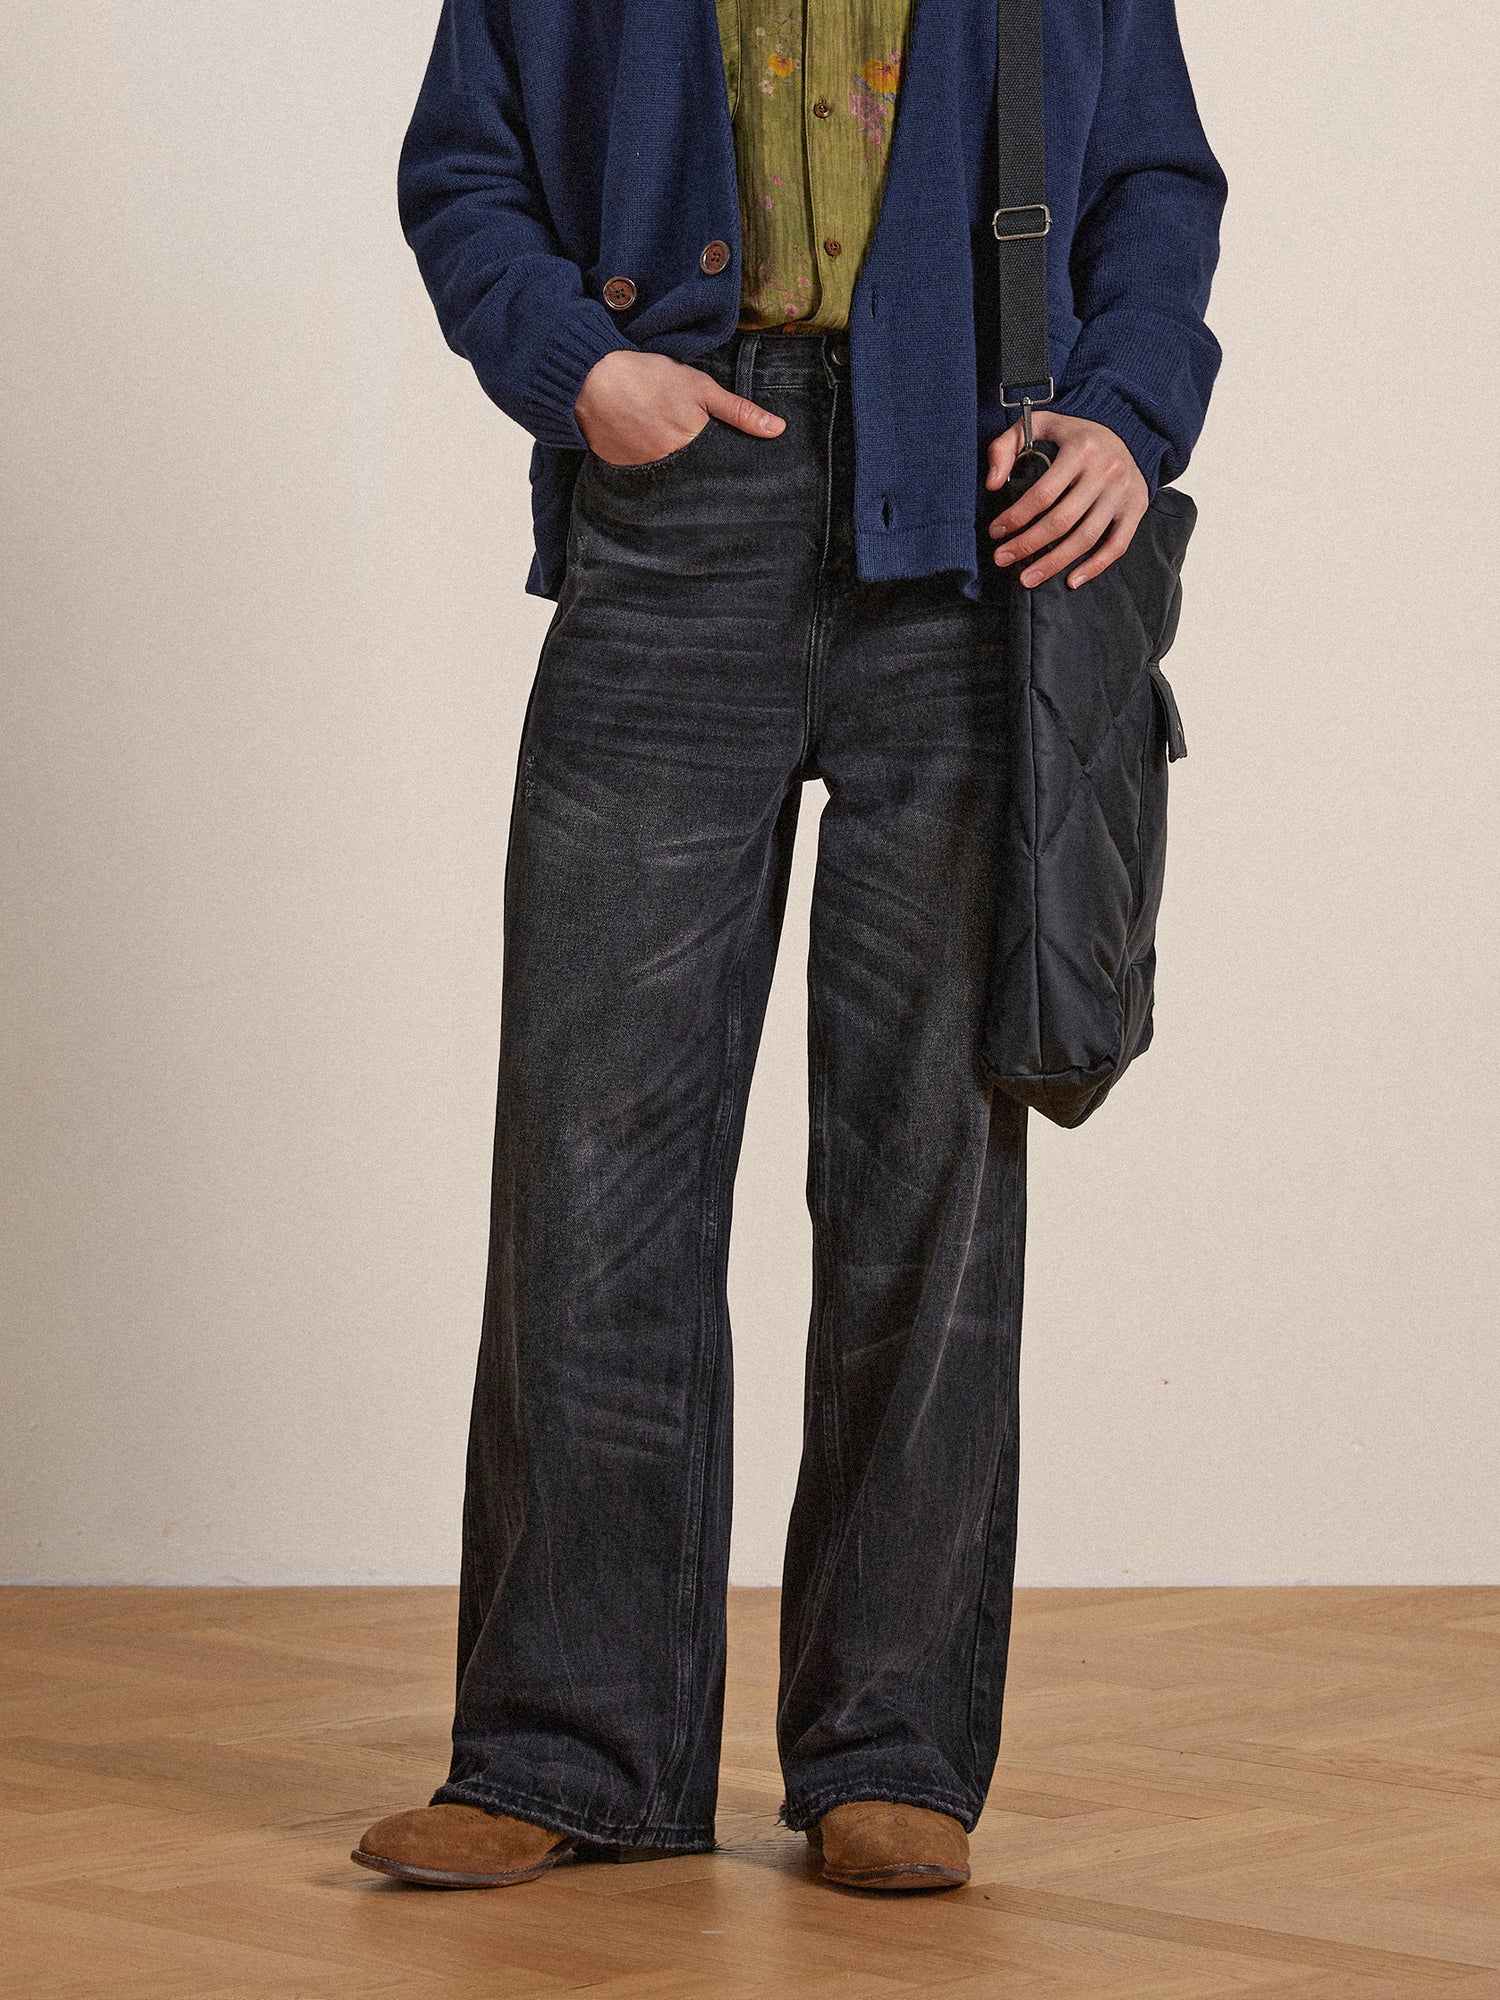 Man in a blue jacket, patterned shirt, and wide-leg black denim jeans standing with a Found Lacy Baggy Jeans, focusing on his mid-section and legs.